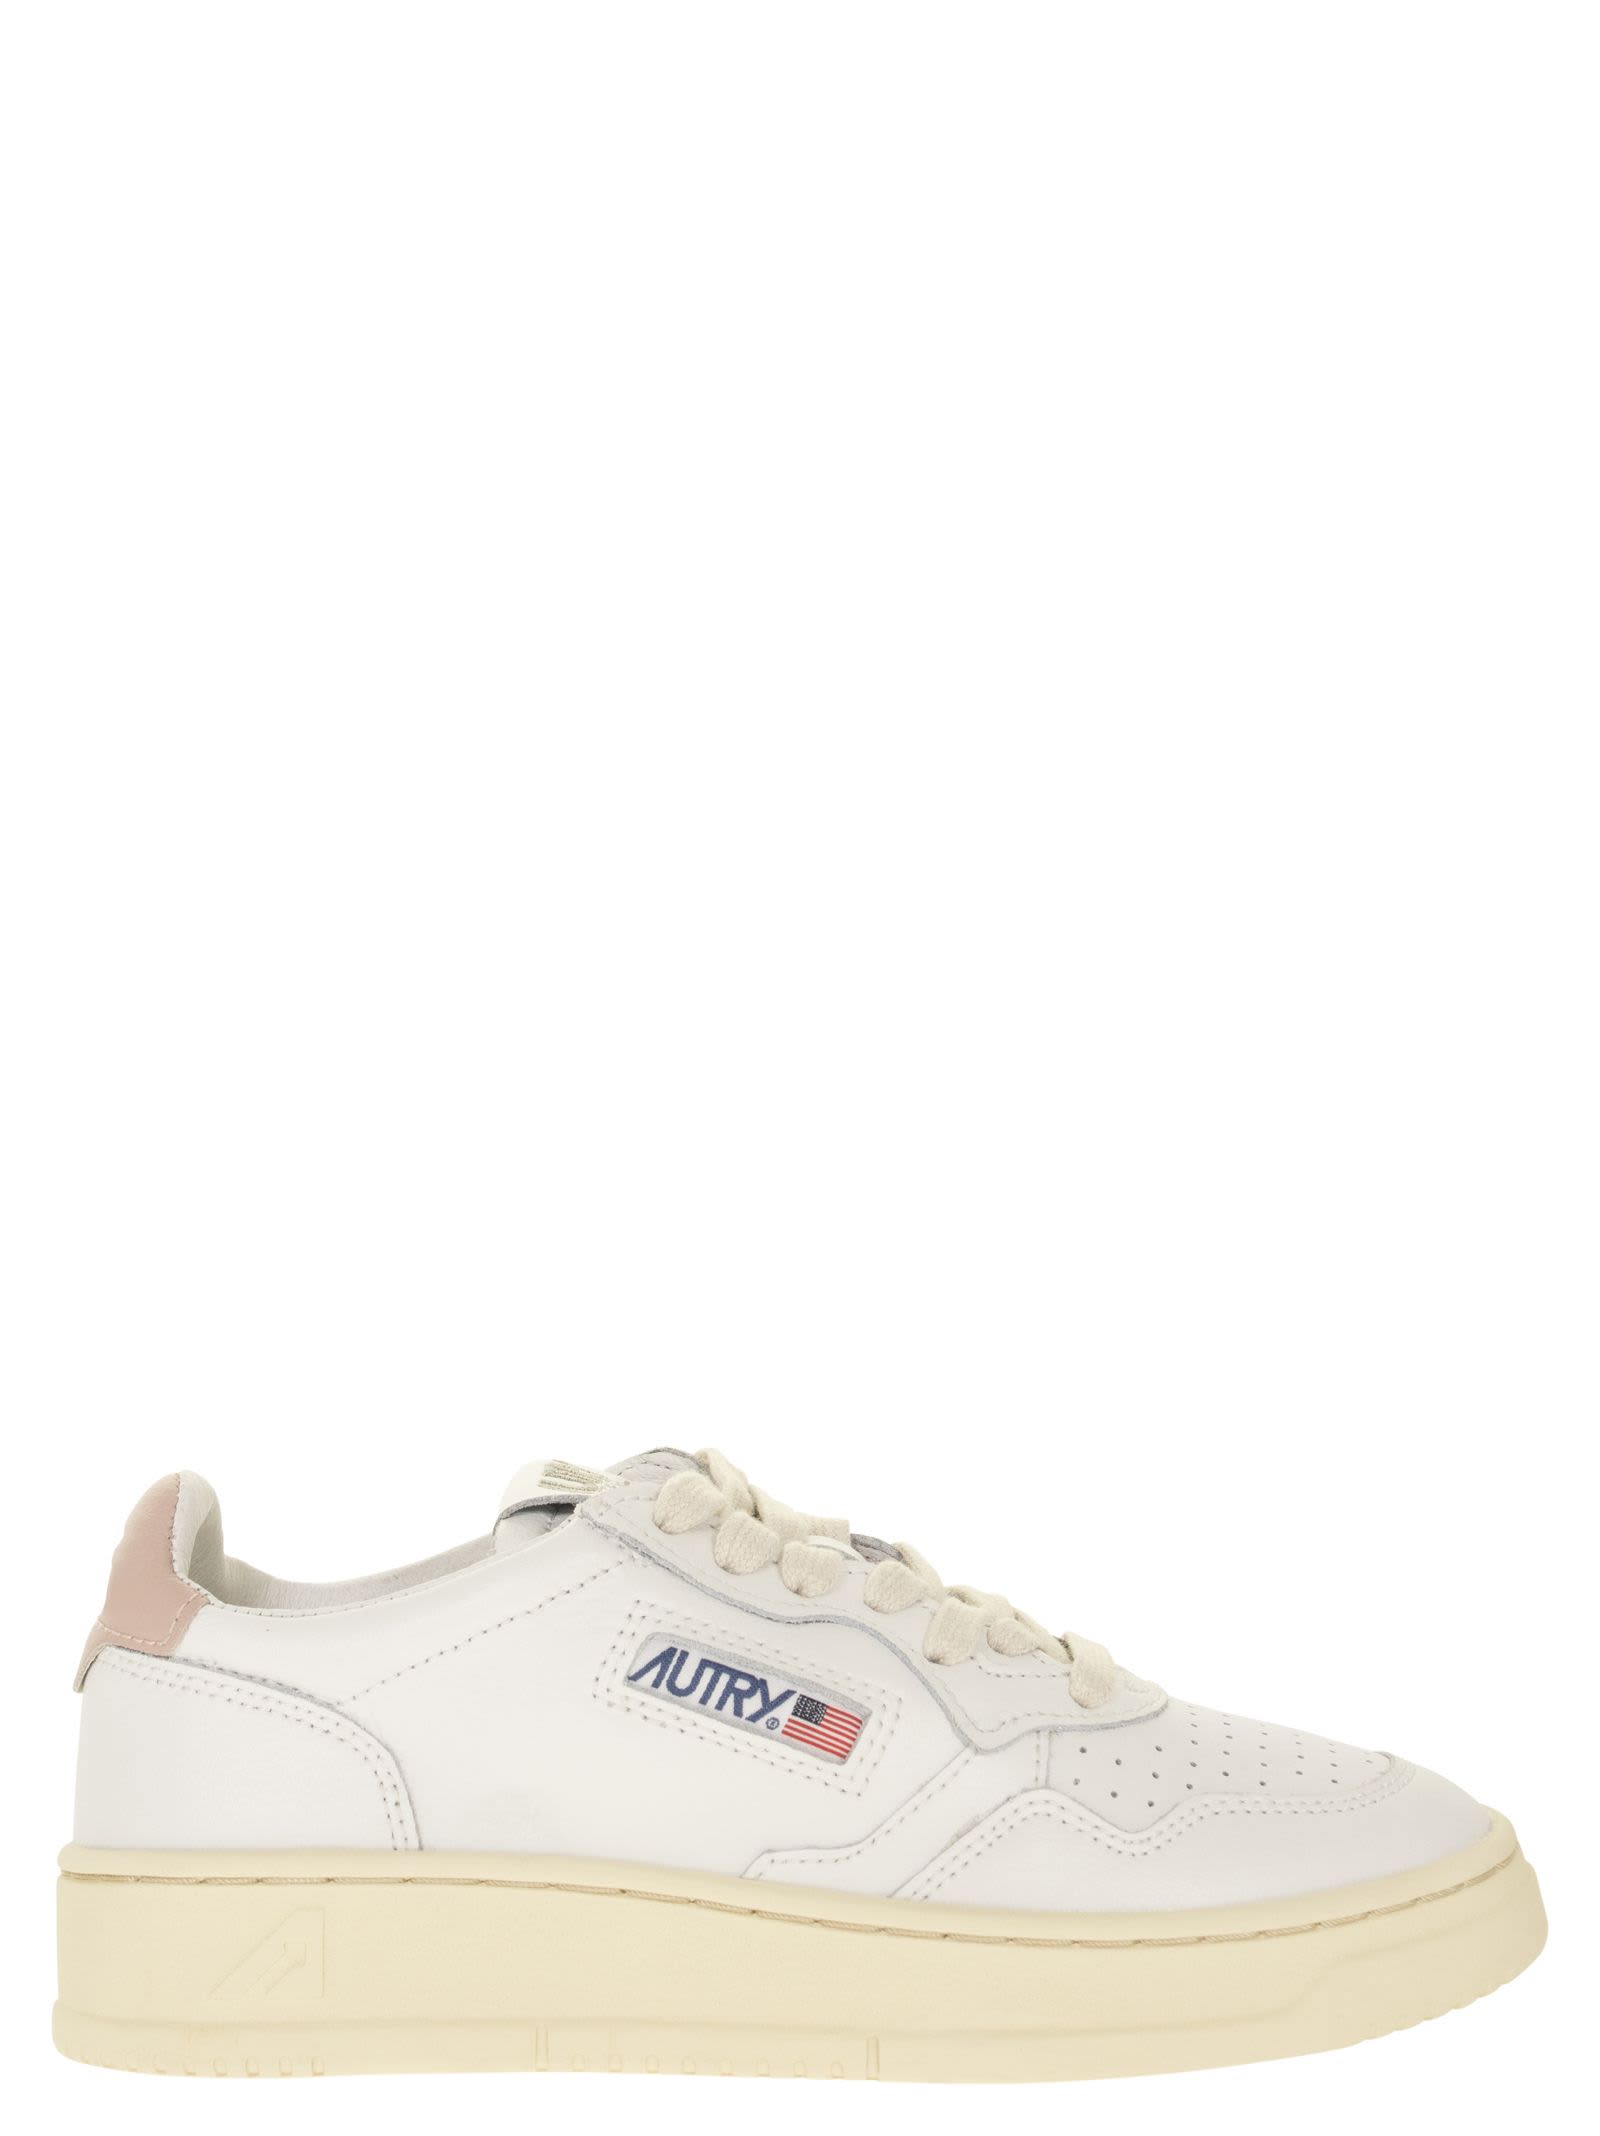 Autry Medalist Low - Leather Sneakers In White/pink